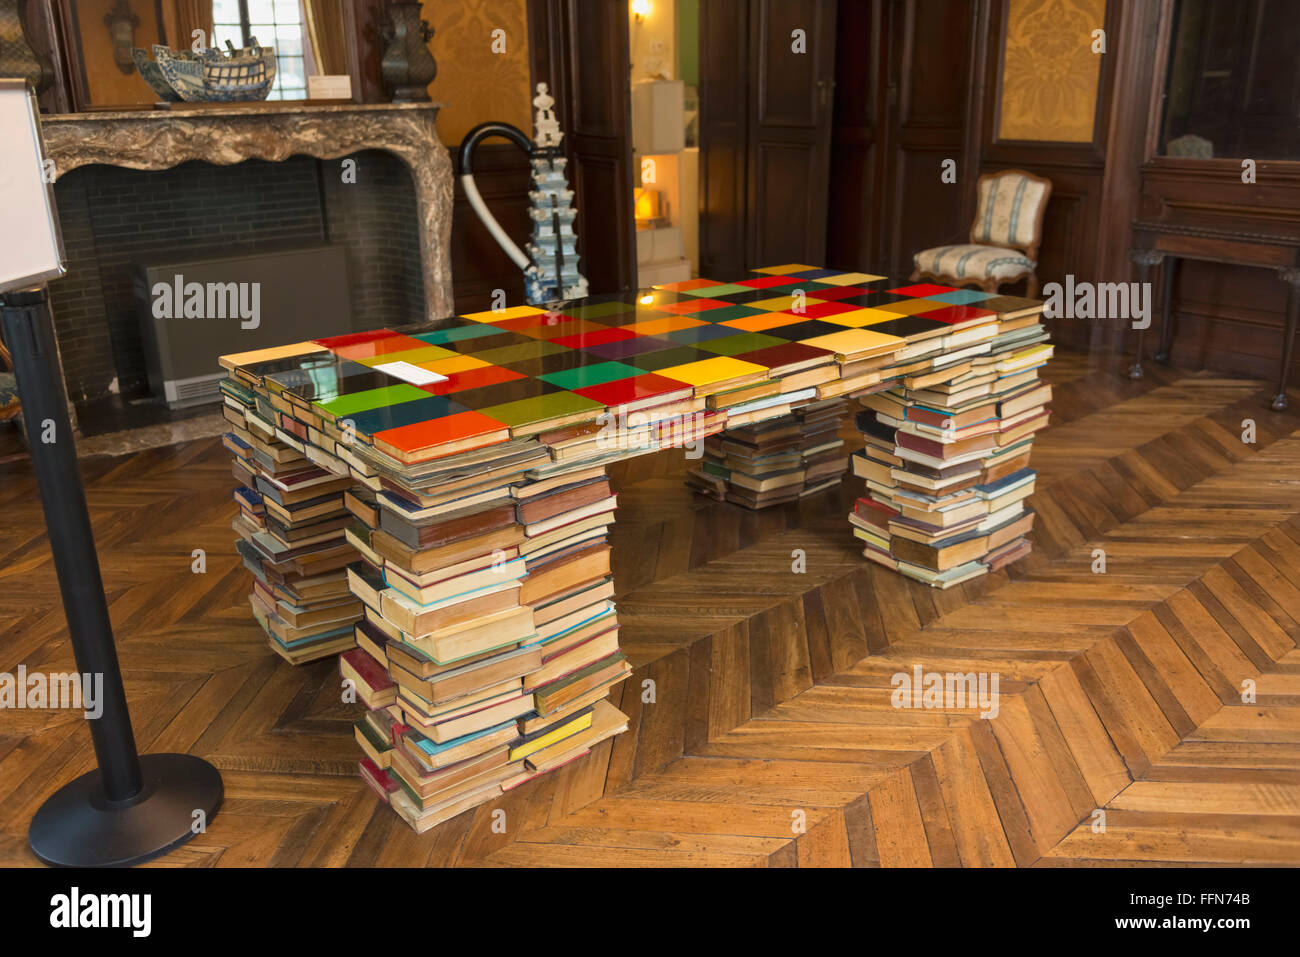 Table made of old books on display in the Design Museum, Ghent, Belgium, Europe Stock Photo